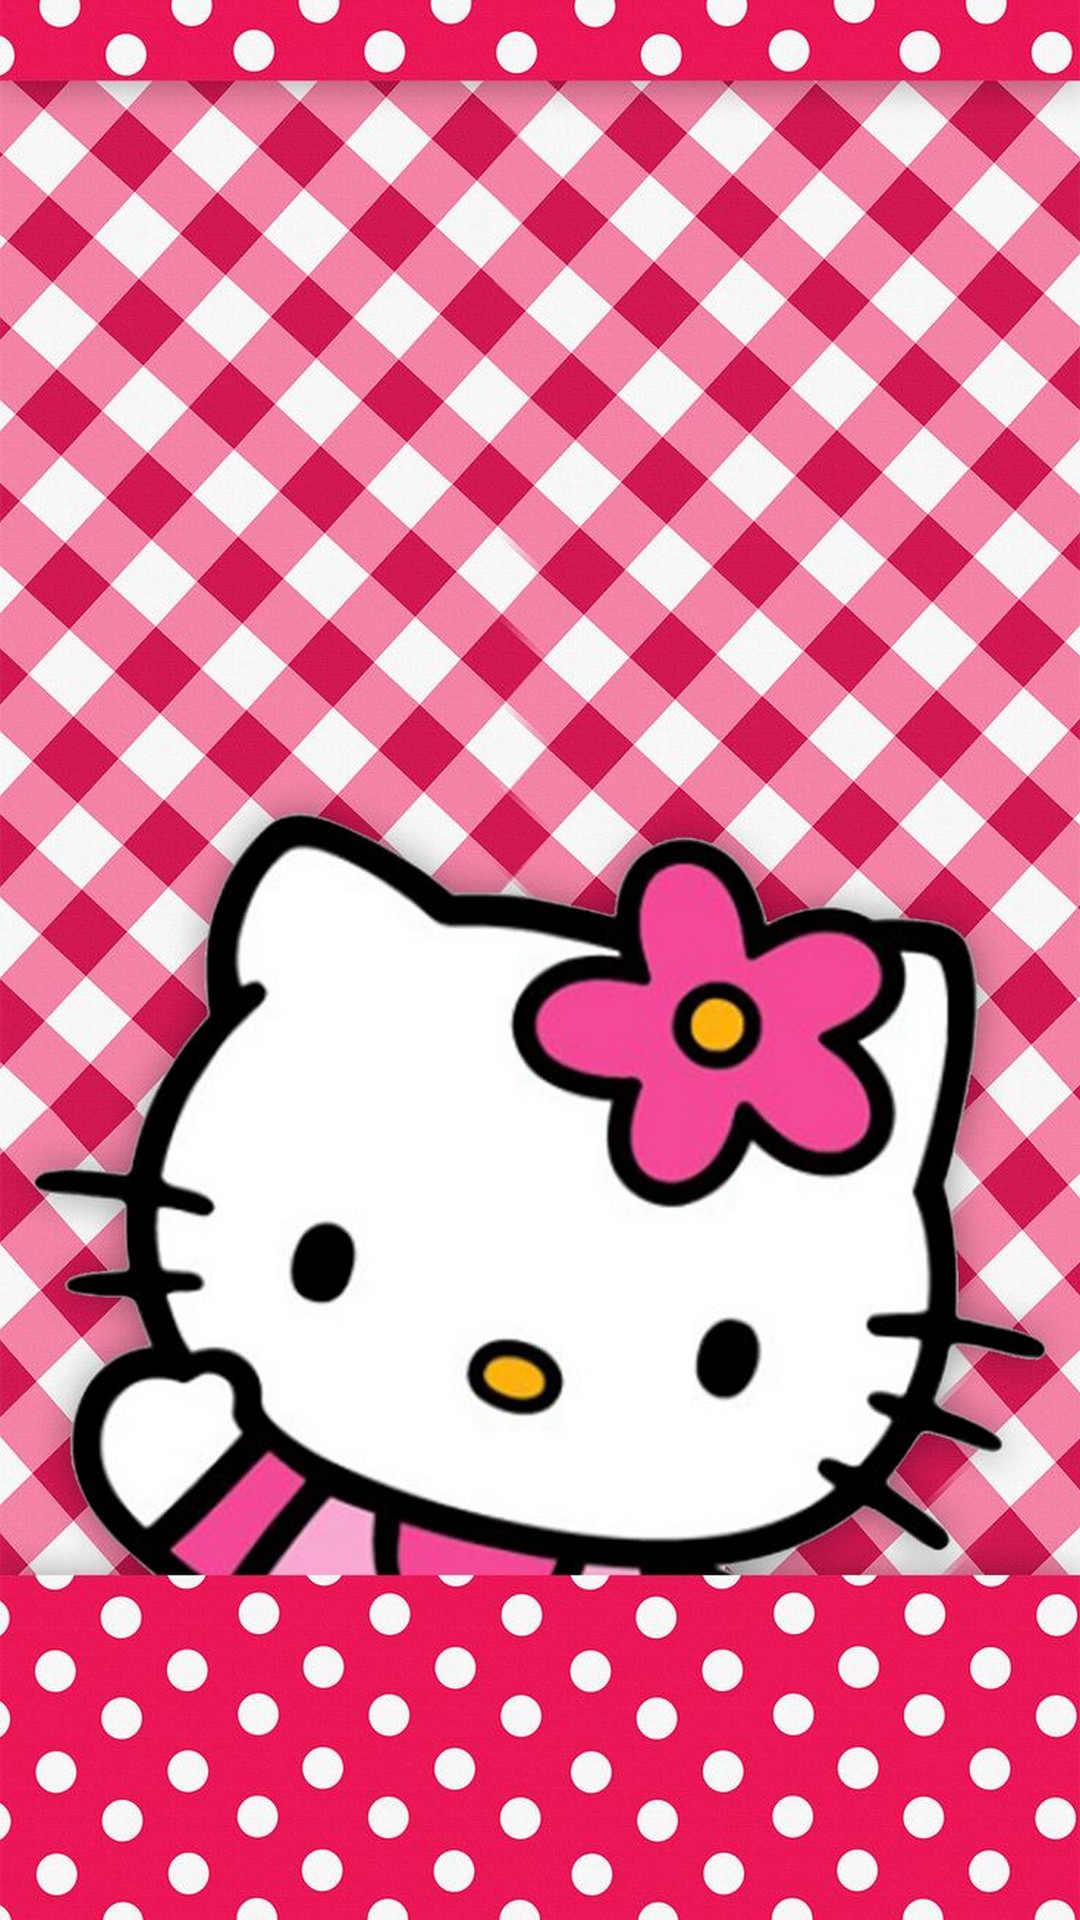 Hello Kitty Iphone Wallpaper With Image Resolution - HD Wallpaper 